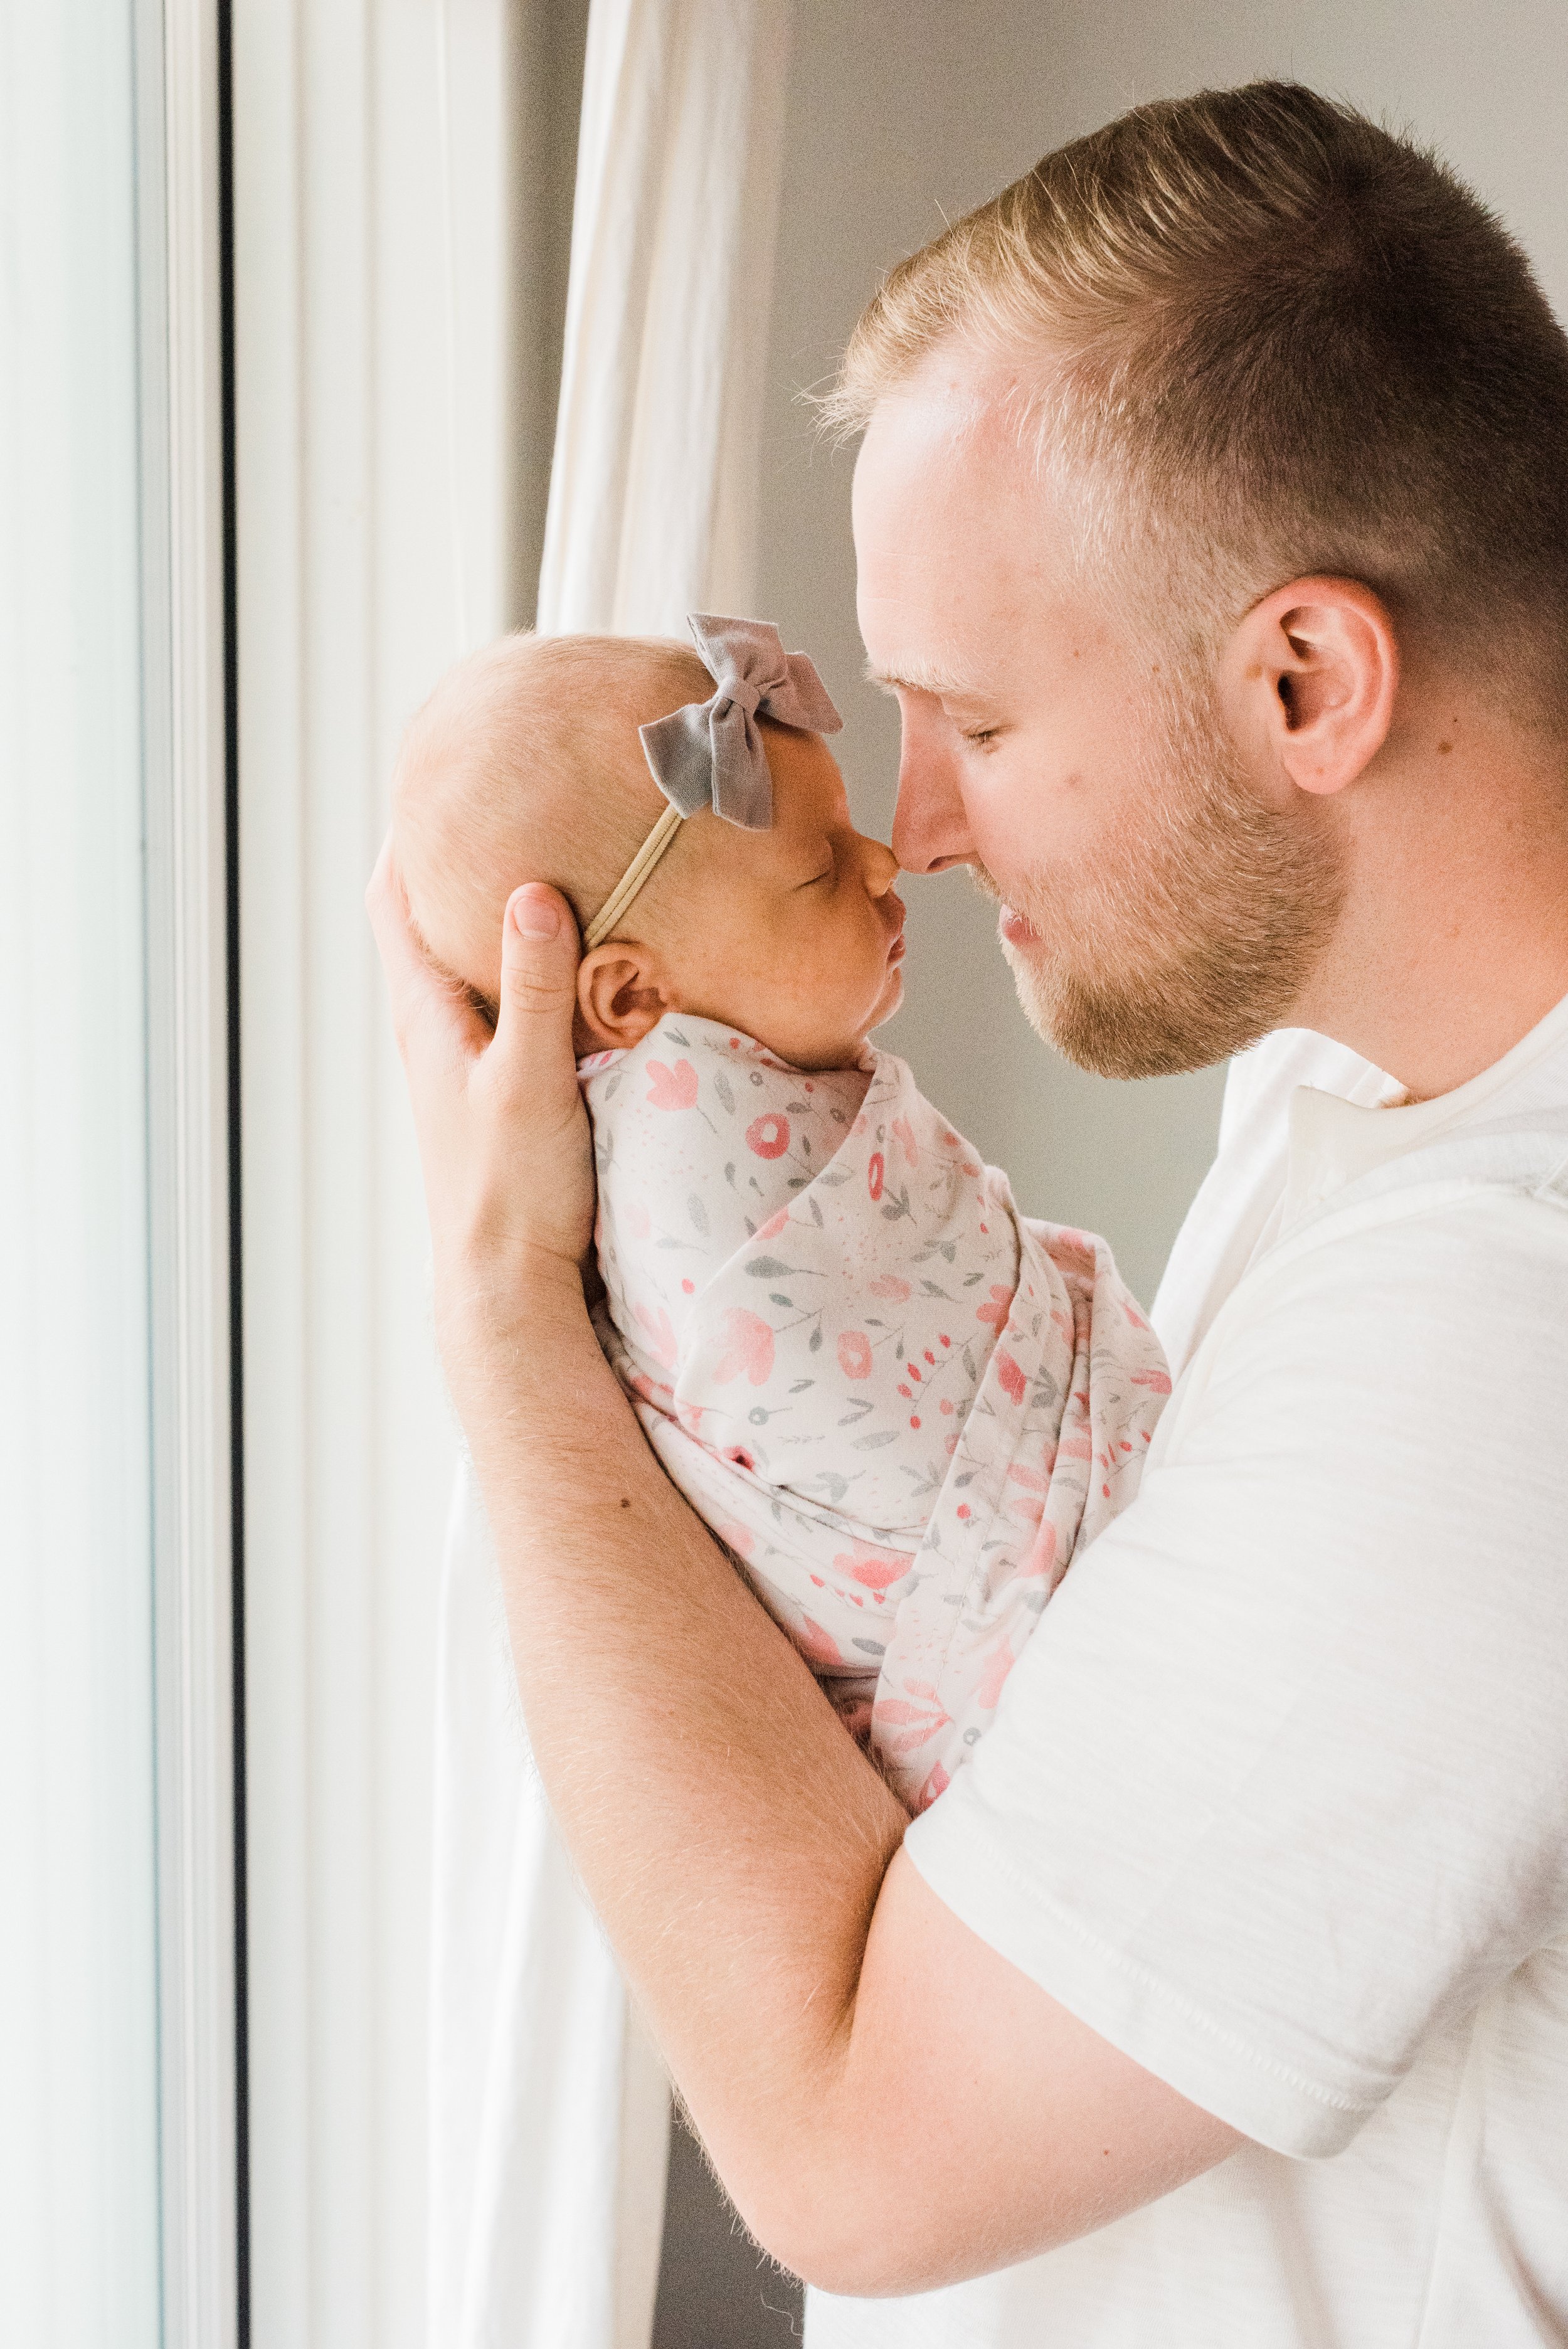  A father holds his newborn daughter and touches noses in this precious moment captured by Atlanta-based photographer, Jacquie Erickson. Newborn photo session DIY newborn photos Senoia, GA #naturallight #newbornphotographytips #diyphotography #mompho